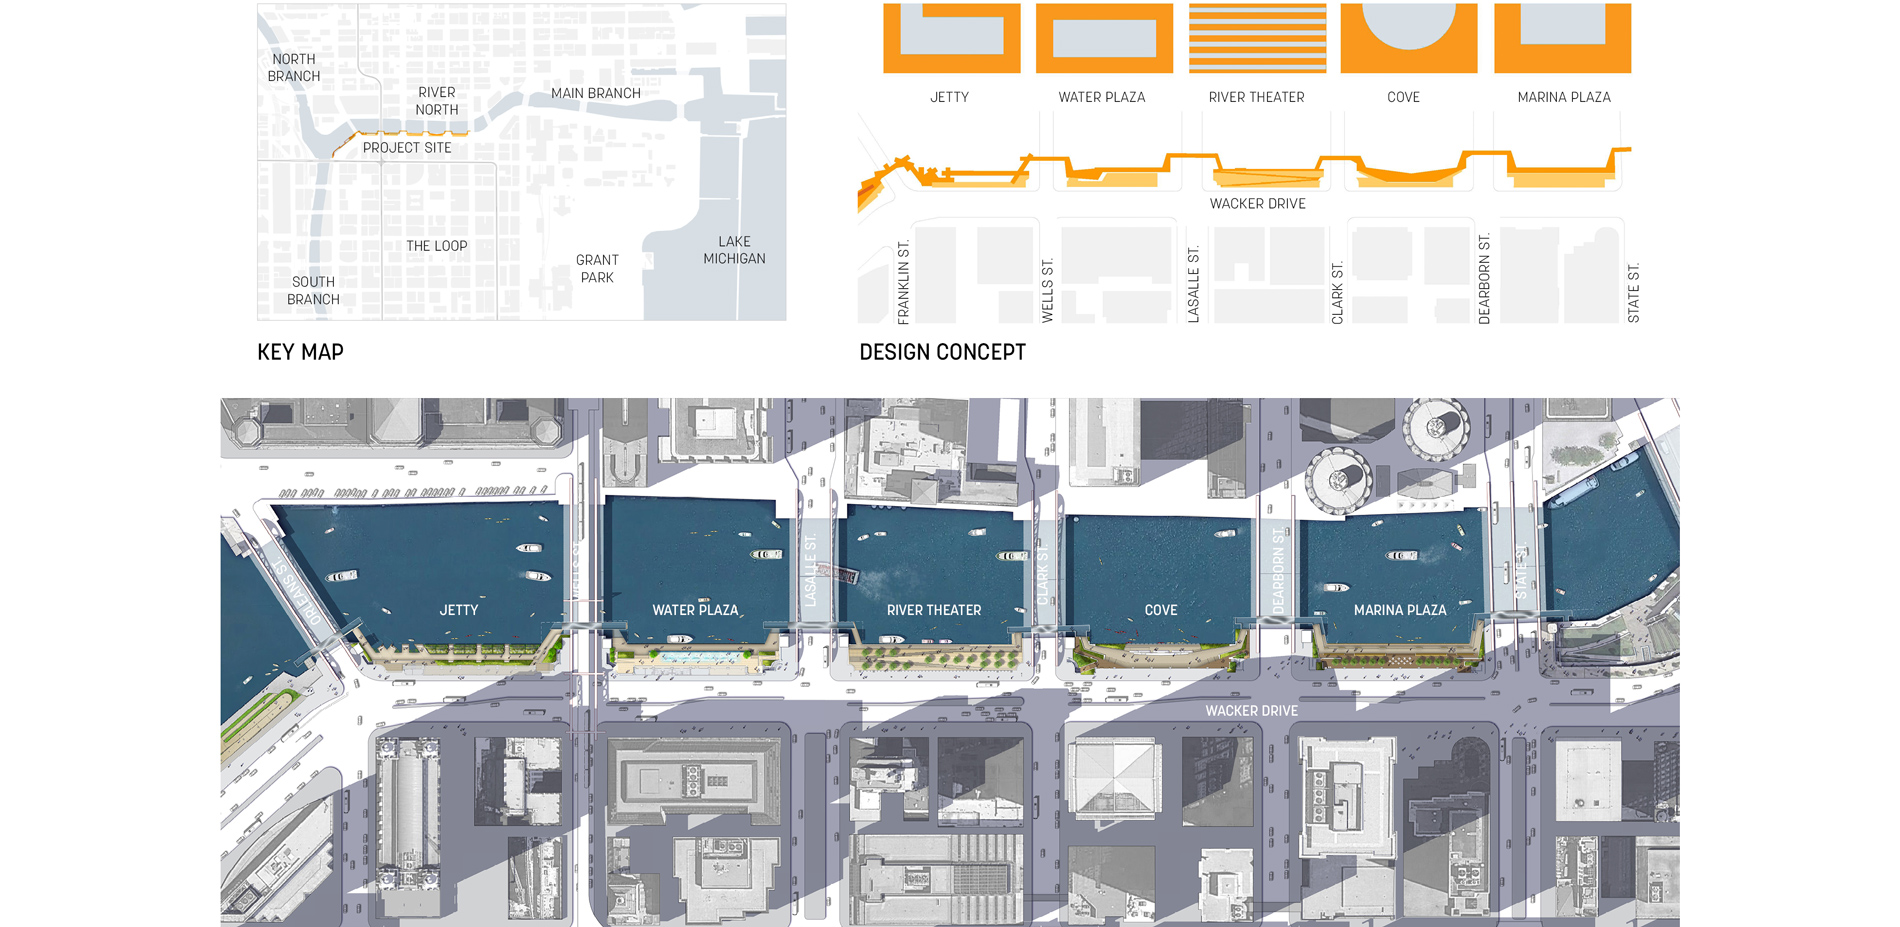 The final phases of an ambitious initiative to reclaim the Chicago River for the ecological, recreational, and economic benefit of the city, this proj…